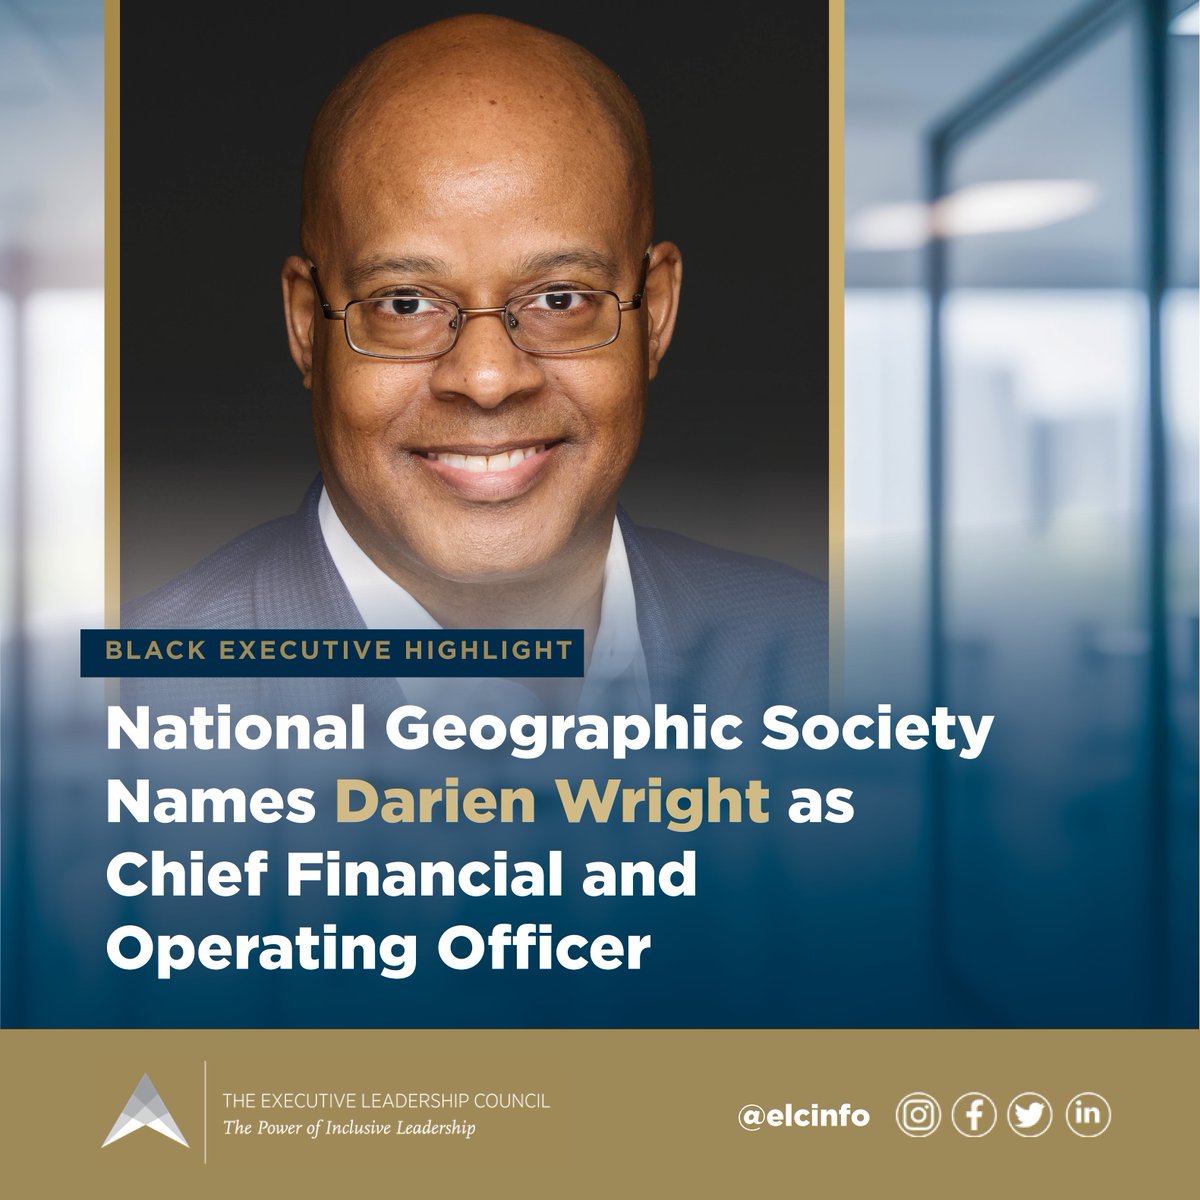 #BlackExecutives: Congratulations to Darien Wright who was named Chief Financial and Operating Officer at National Geographic Society (@NatGeo). 

Read more: prnewswire.com/news-releases/…

#BlackMenLead #BlackProfessionals #BlackLeadership